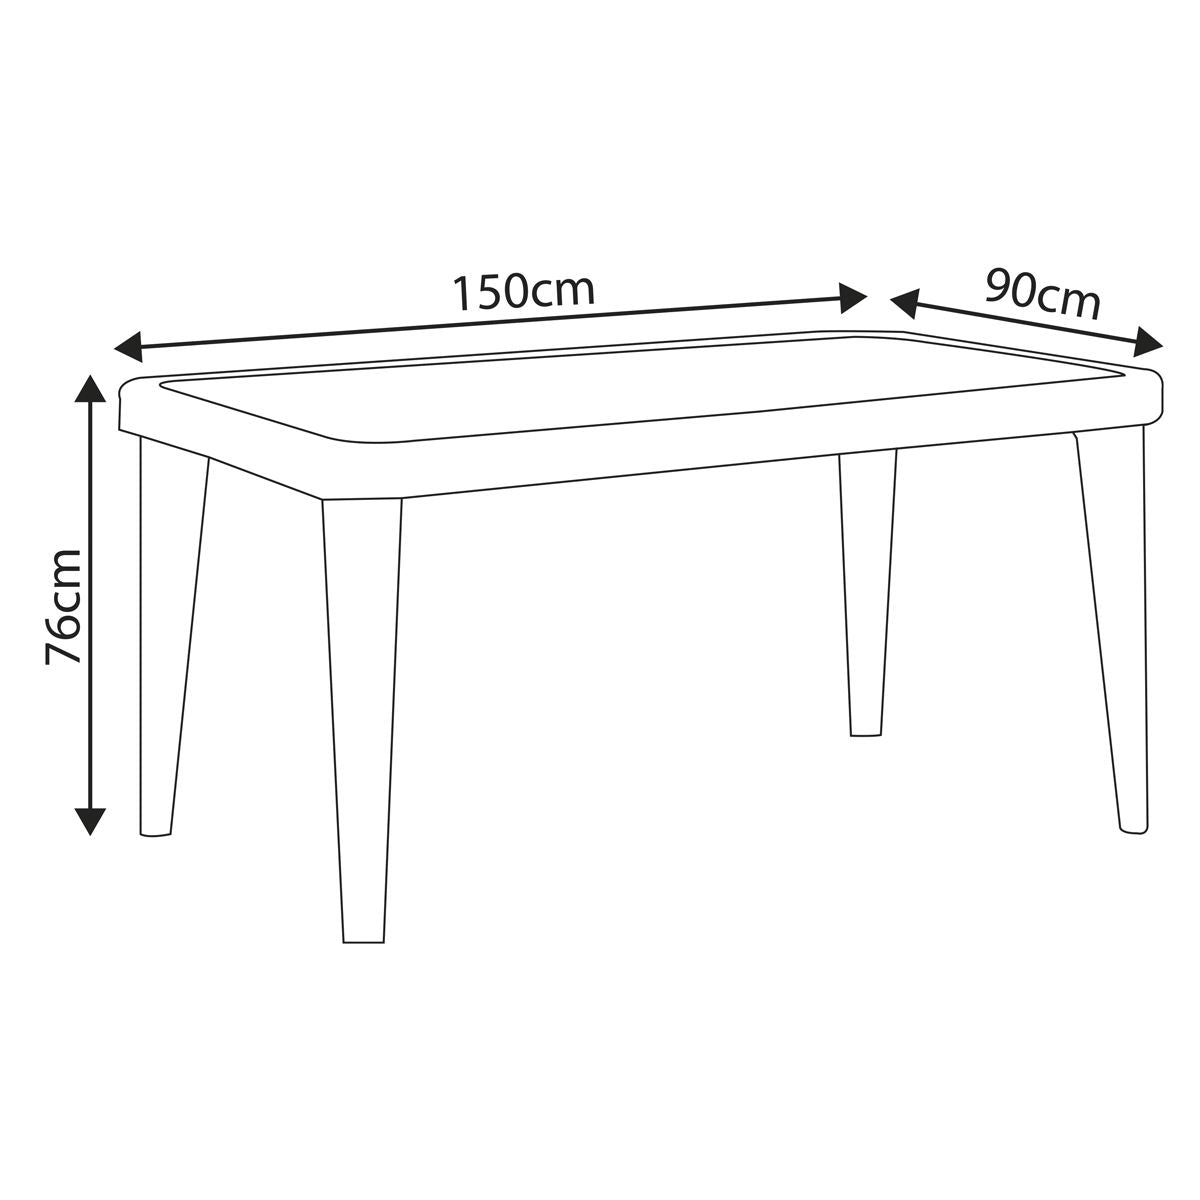 Dellonda Outdoor Dining Table Weather Resistant Body Glass Table 90x150cm